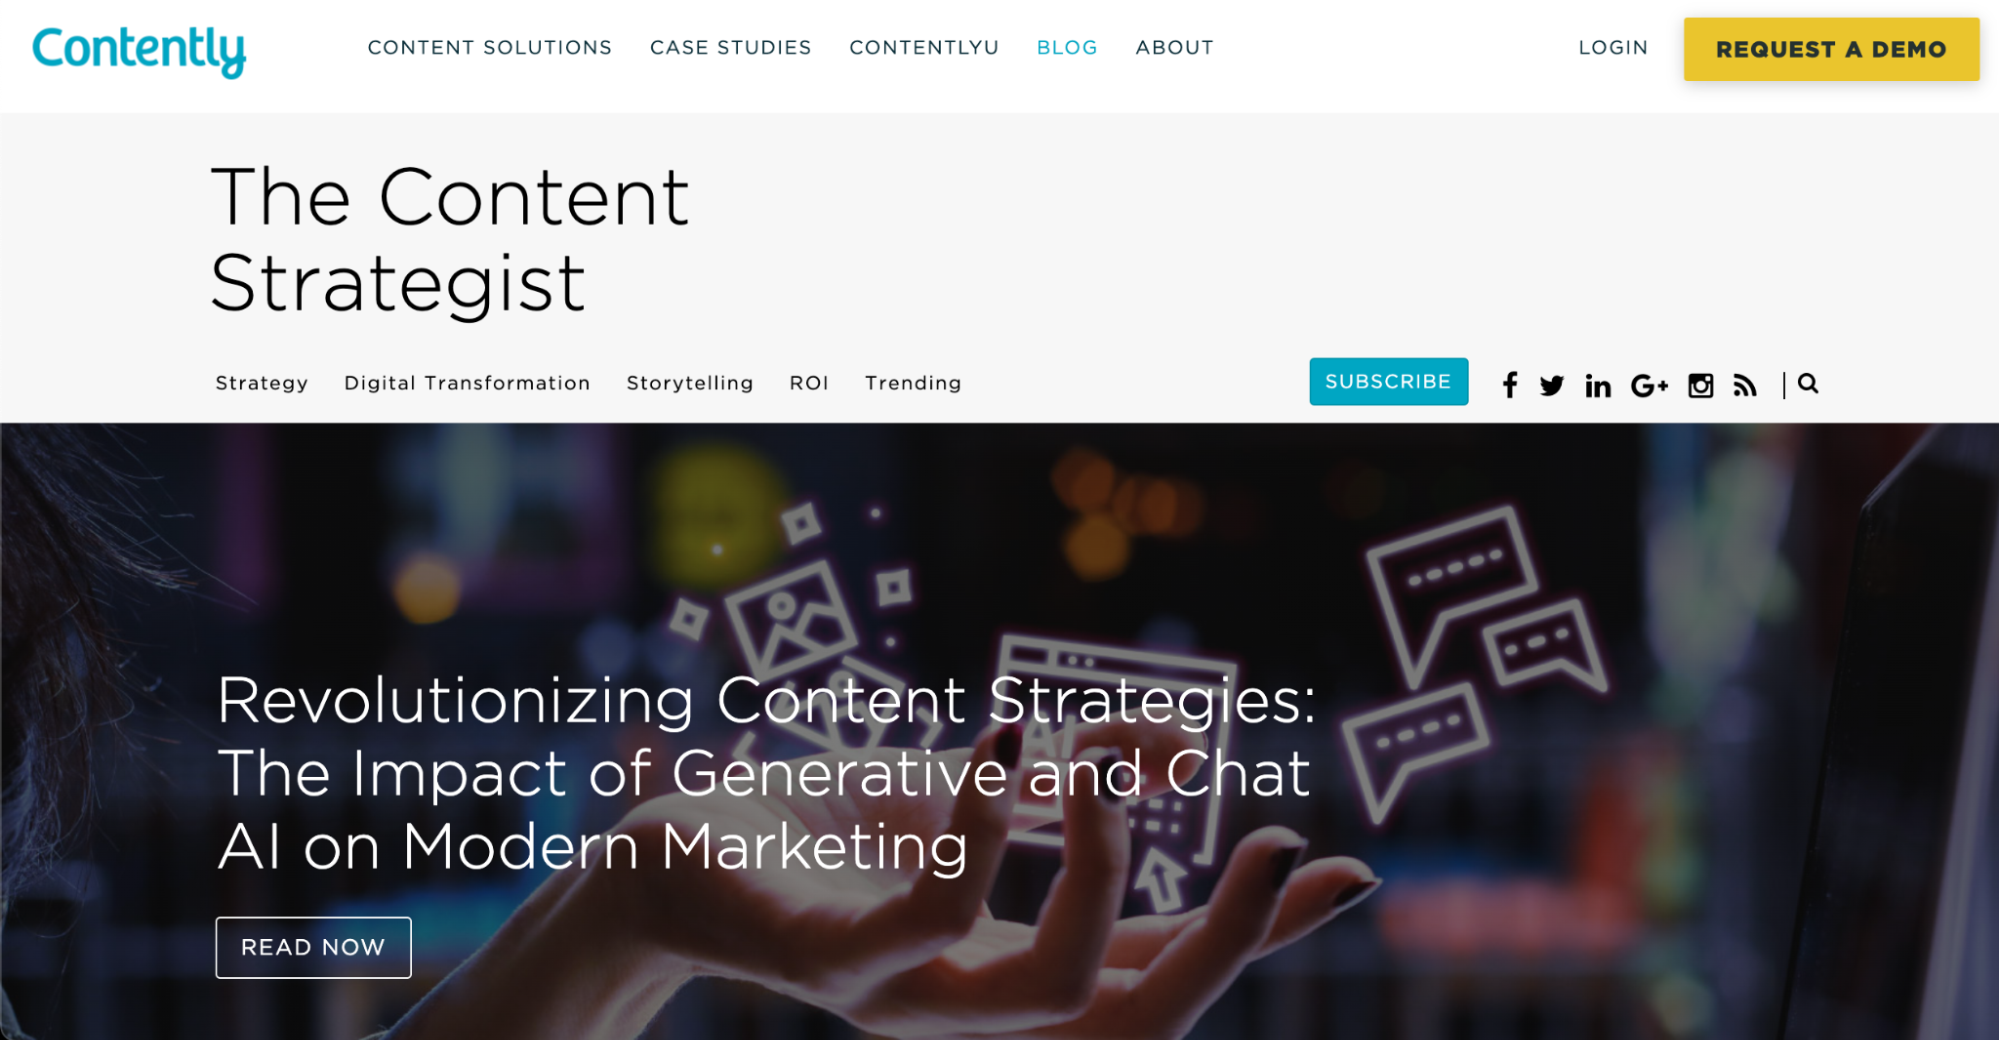 The Content Strategist by Contently - Ectesso